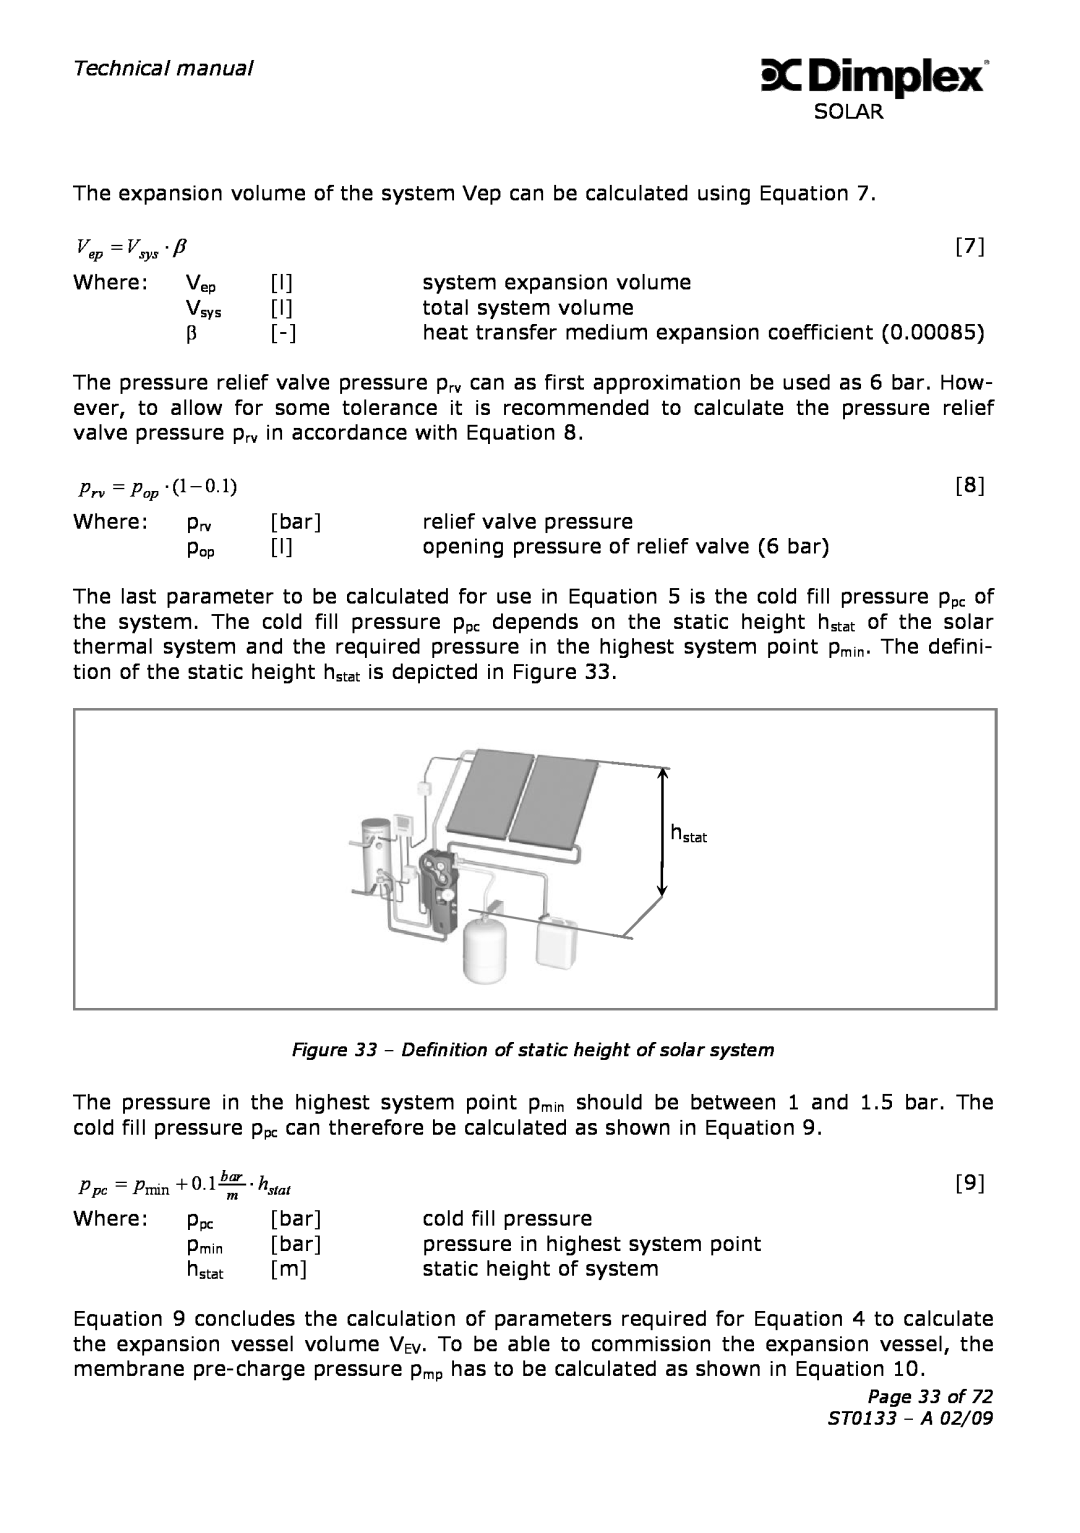 Dimplex technical manual Definition of static height of solar system, Page 33 of ST0133 - A 02/09 